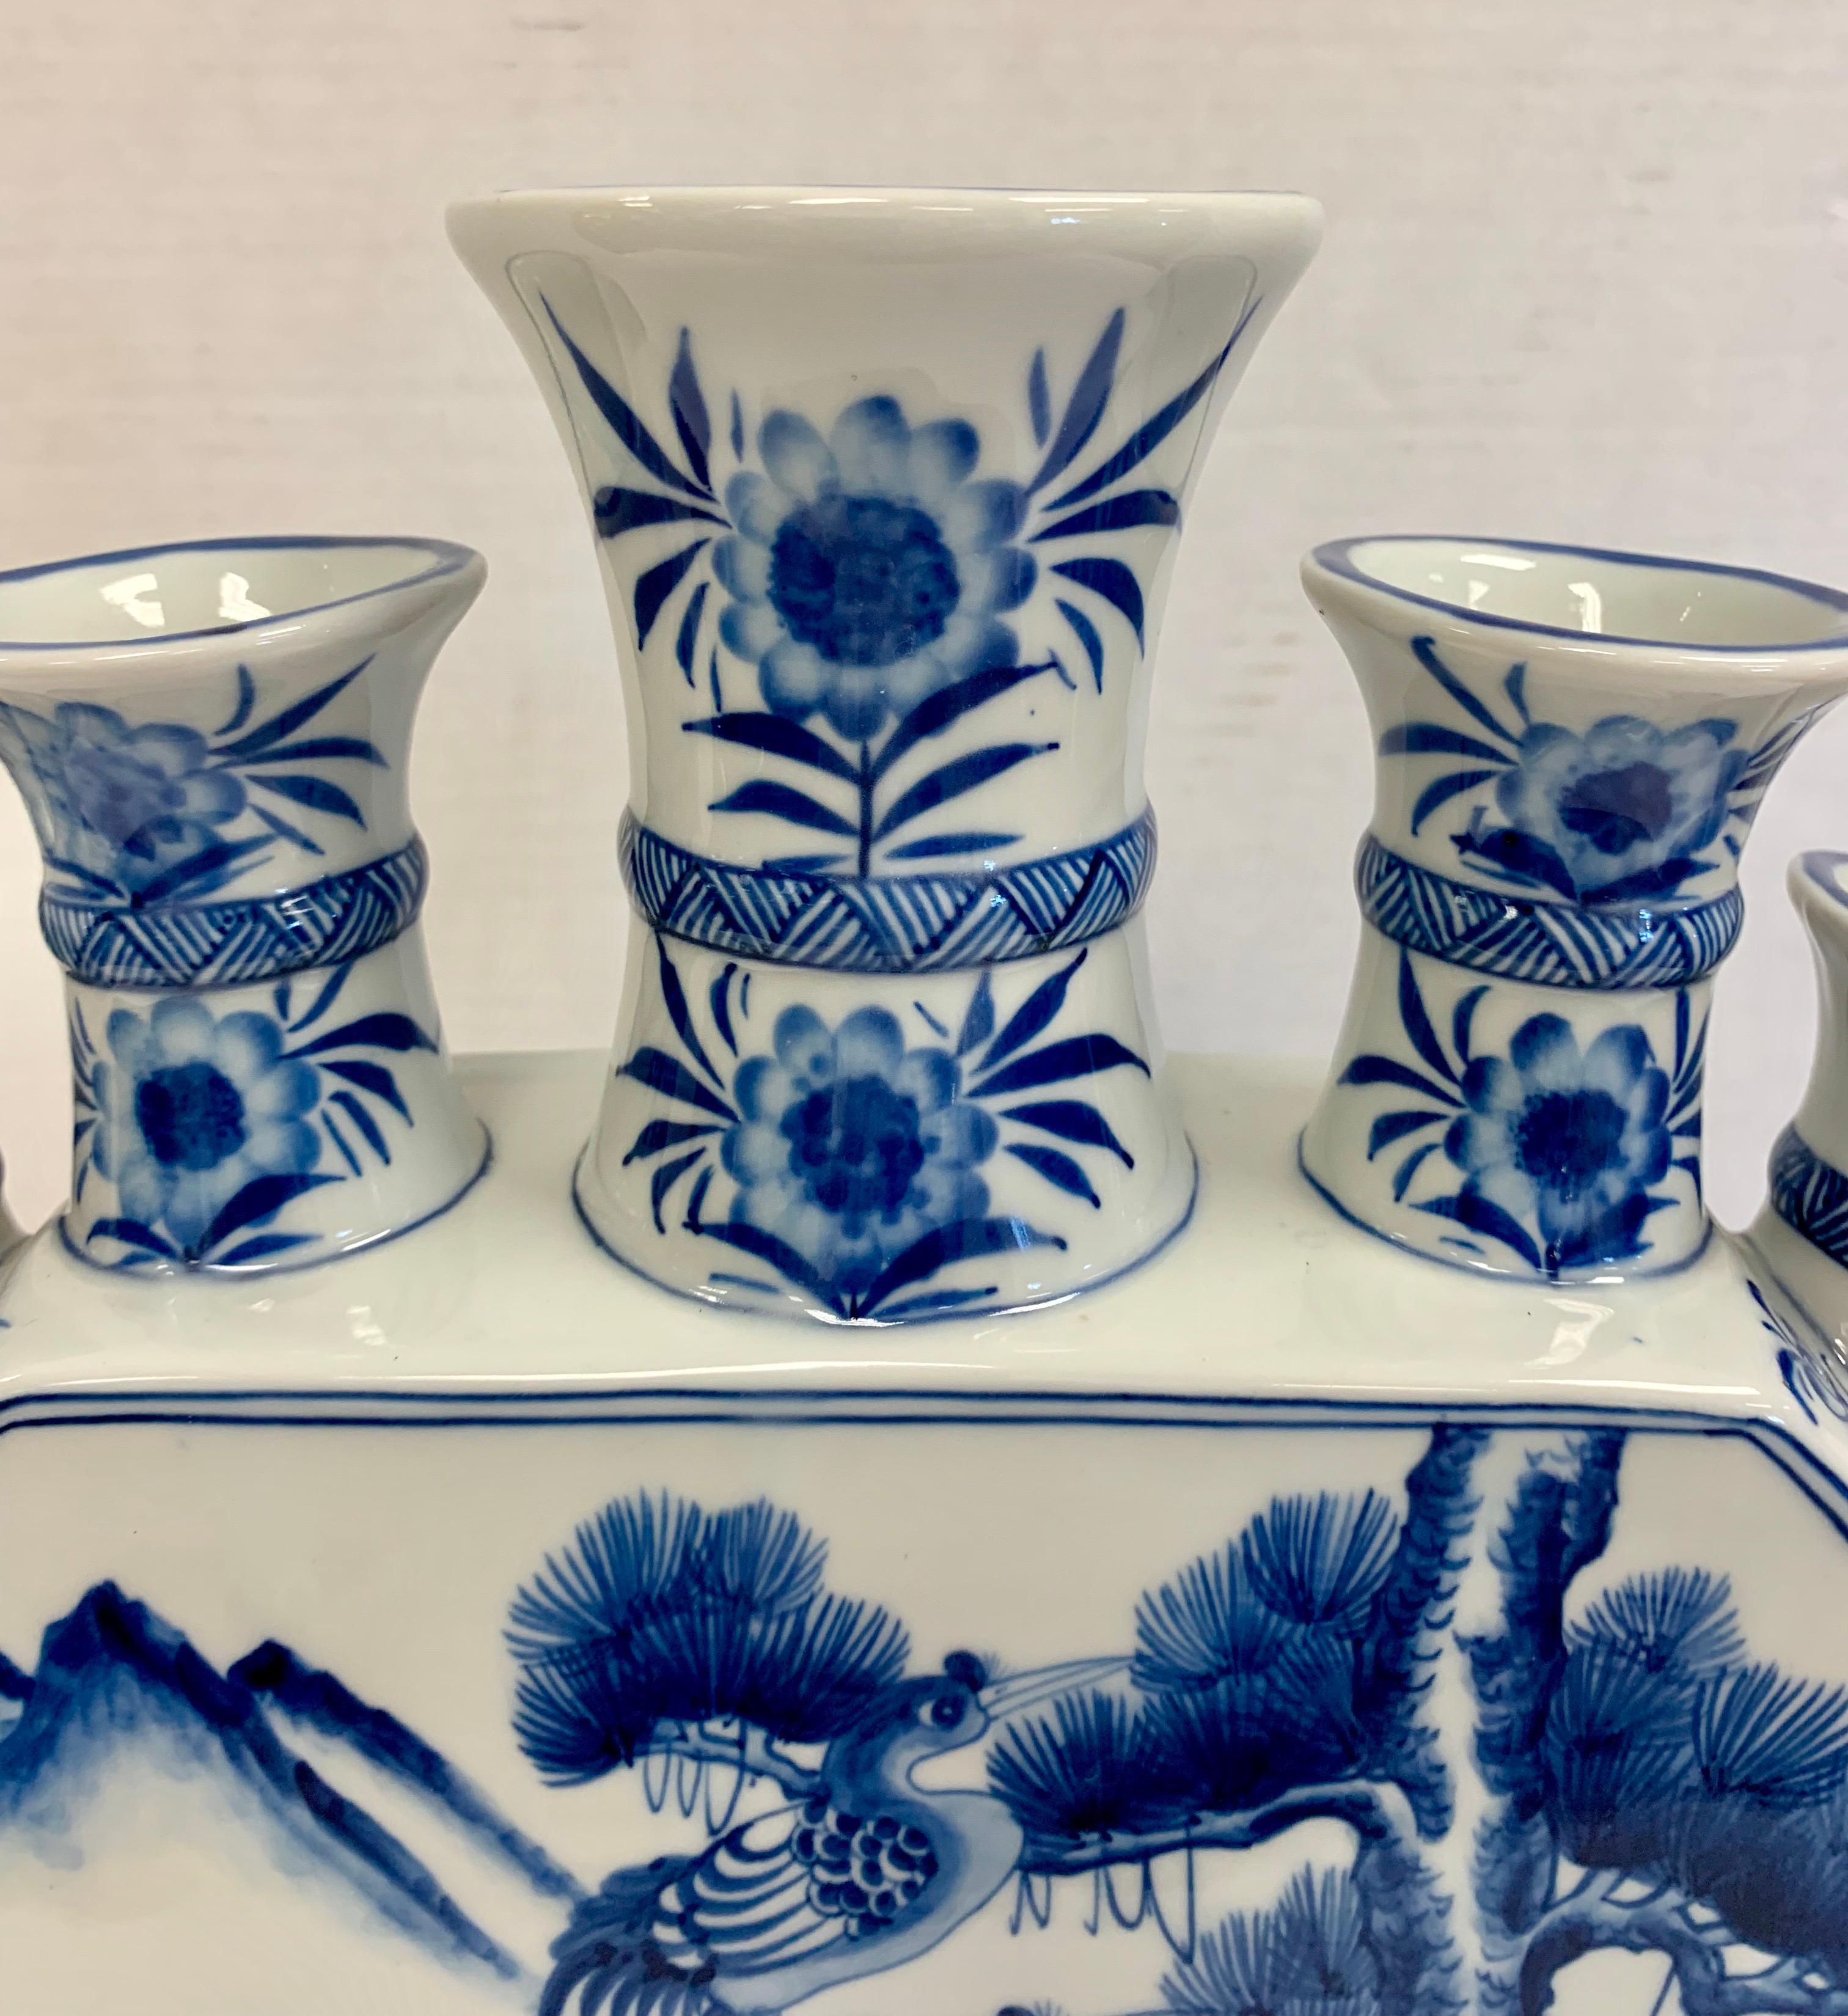 Magnificent five spout Chinese blue and white tulipiere vase.